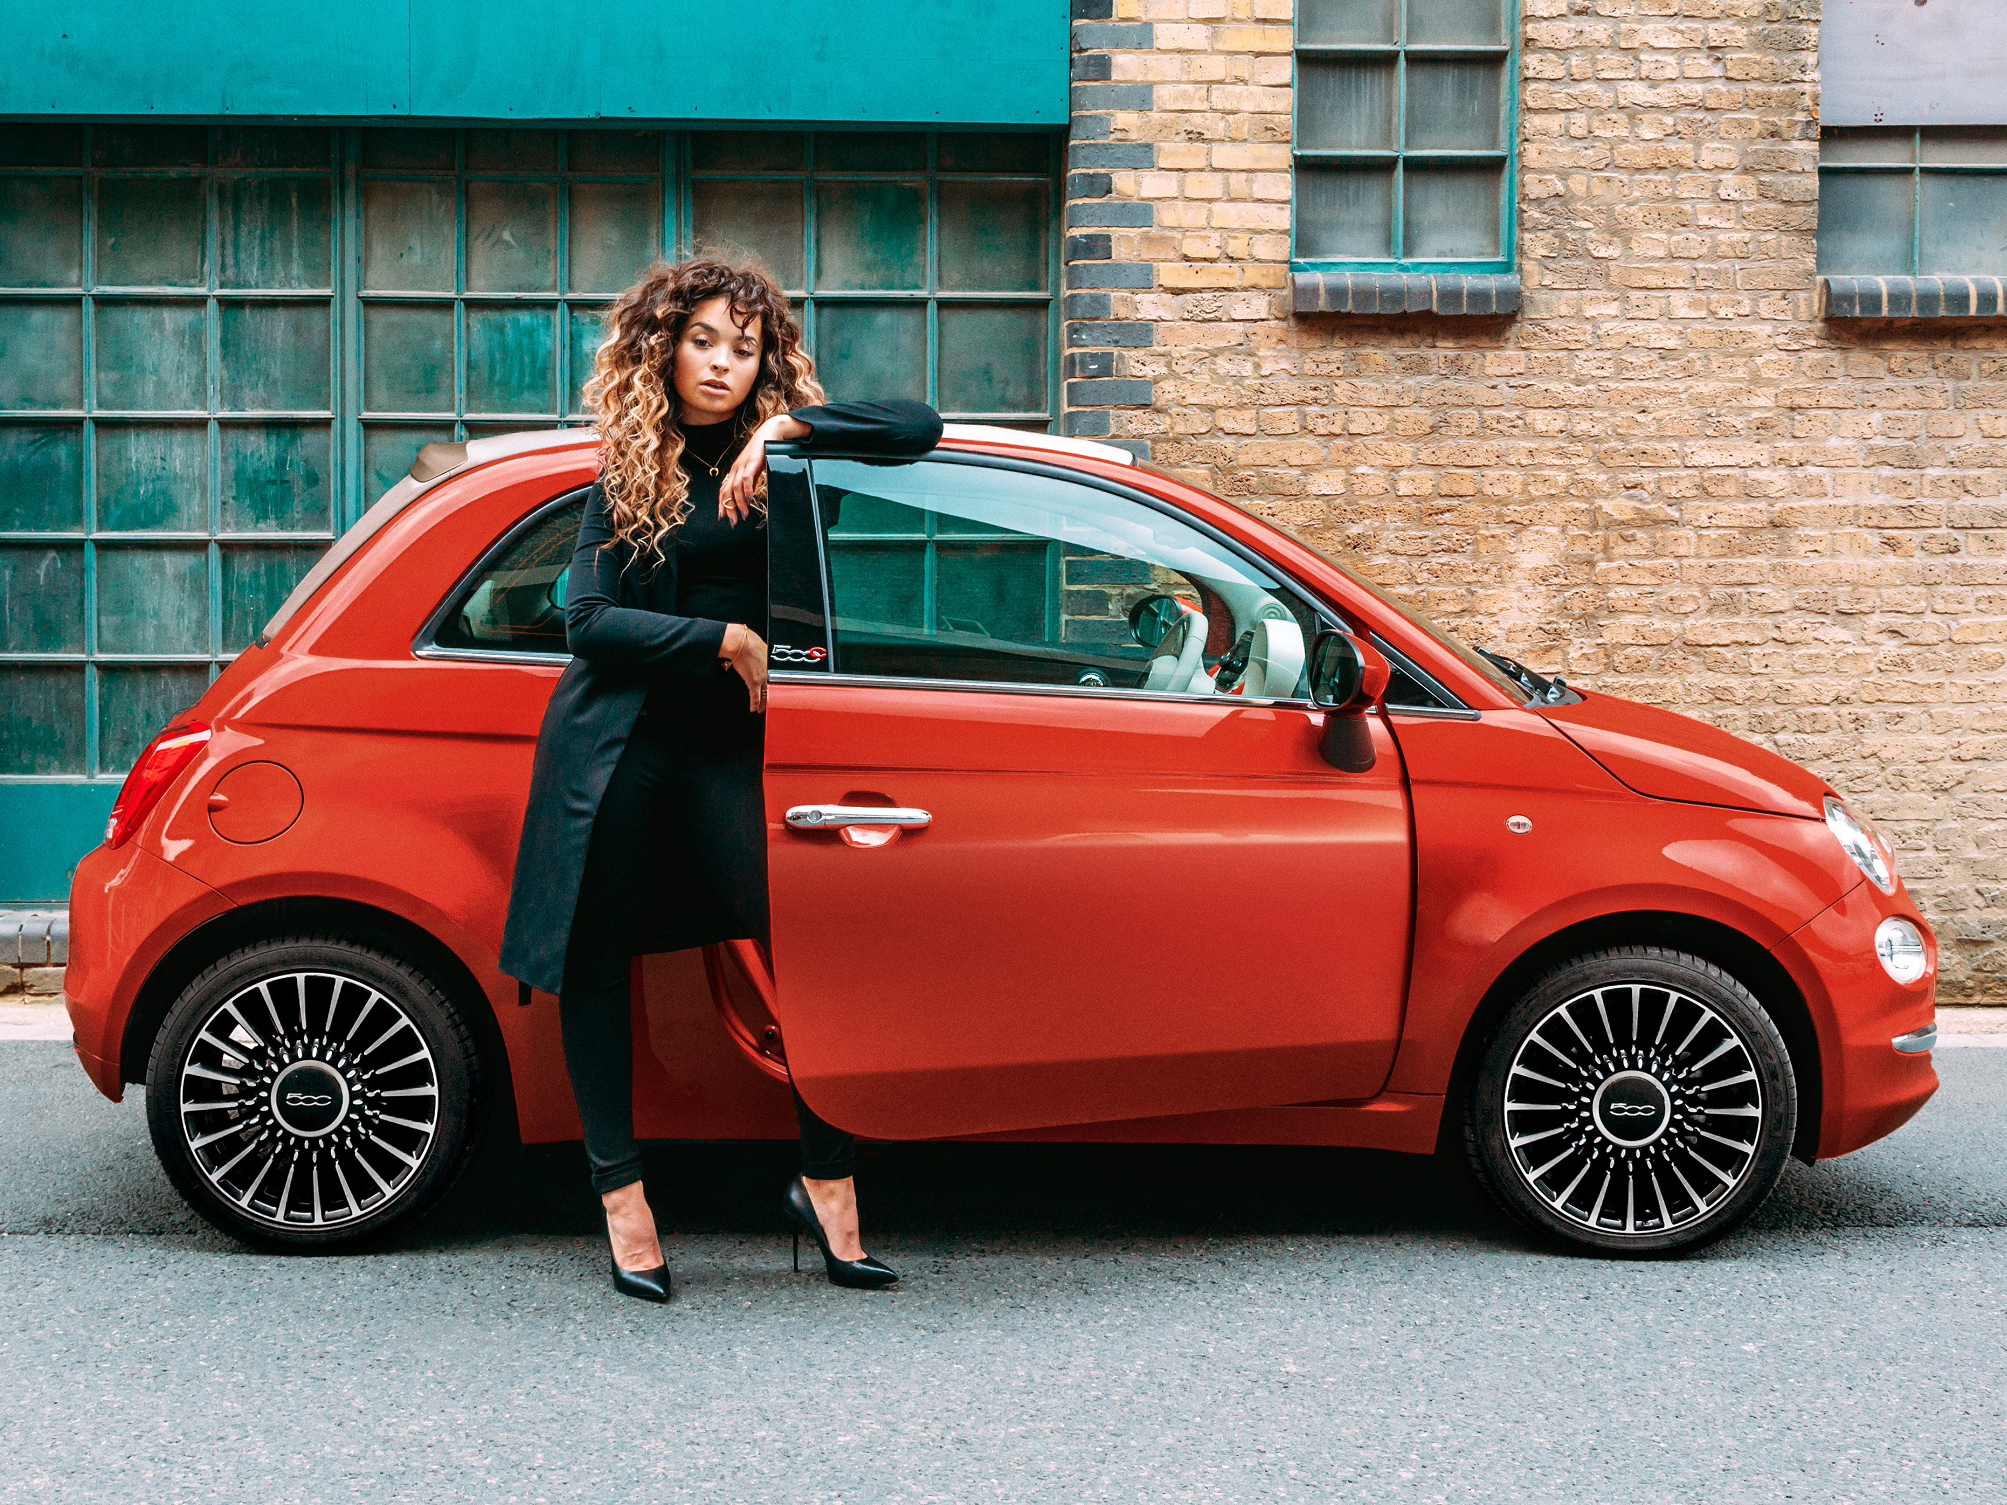 Fiat 500 to perform with Ella Eyre on stage